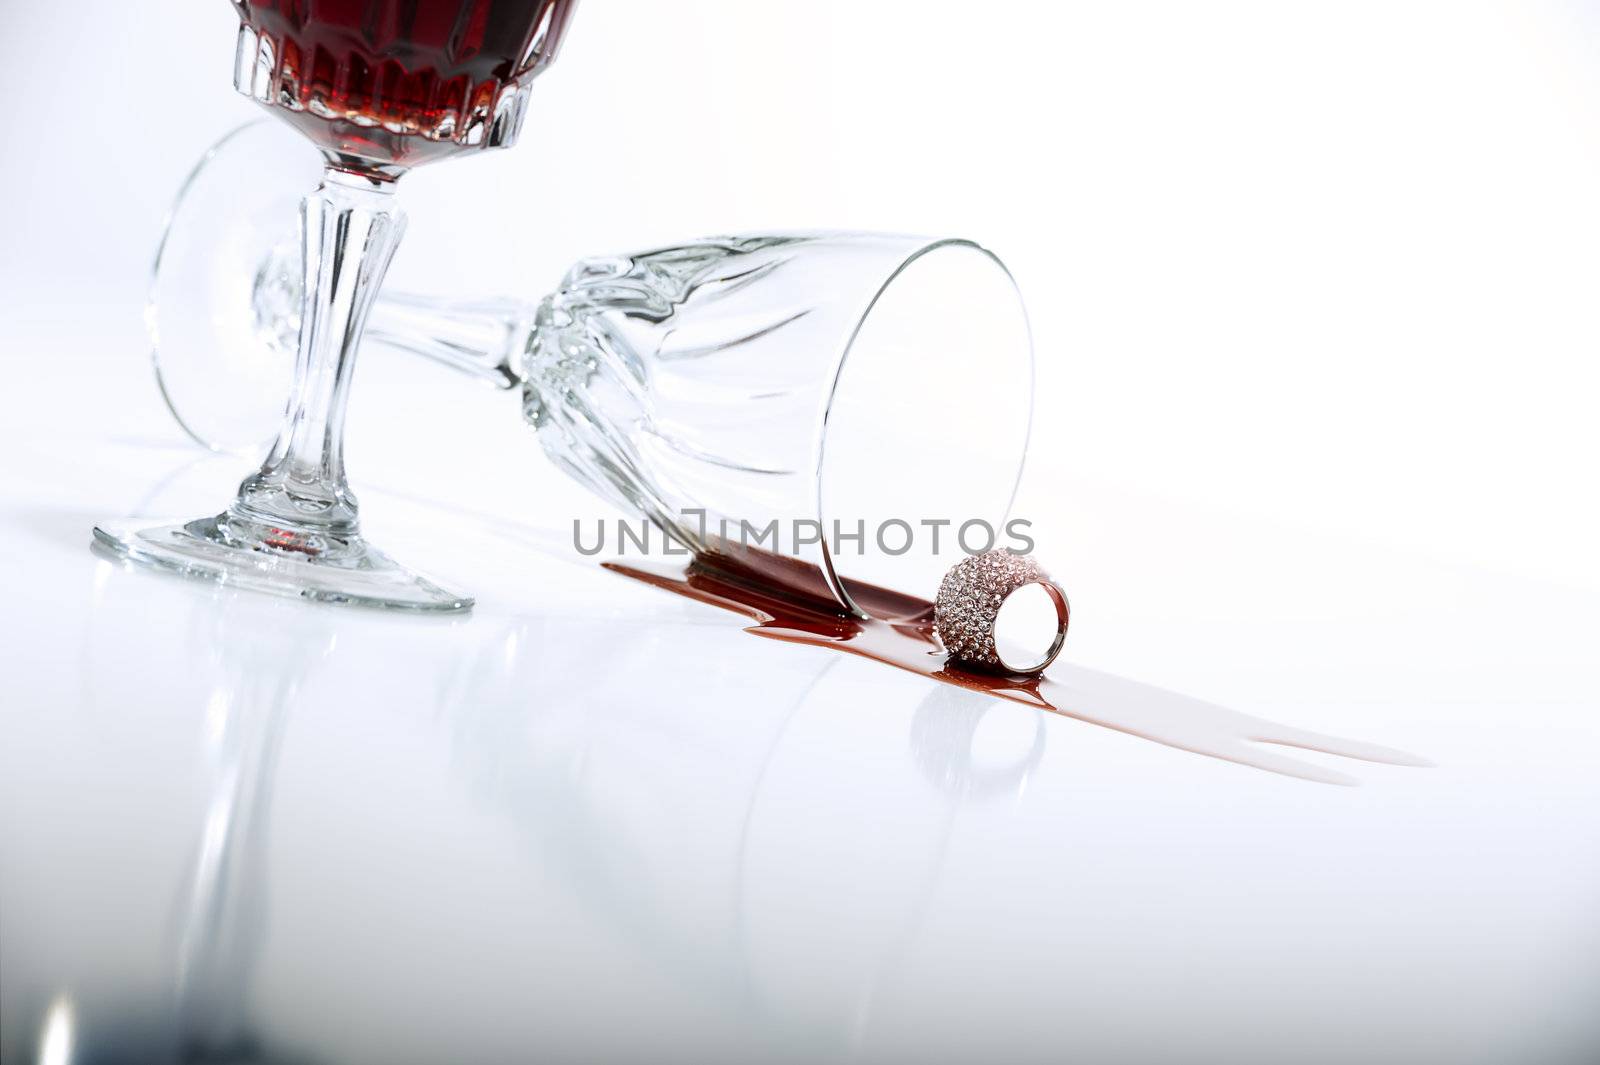 Low angle view across a reflective white countertop of a pool of spilled red wine from crystal wineglass lying on its side alongside a full cropped upright glass with copyspace